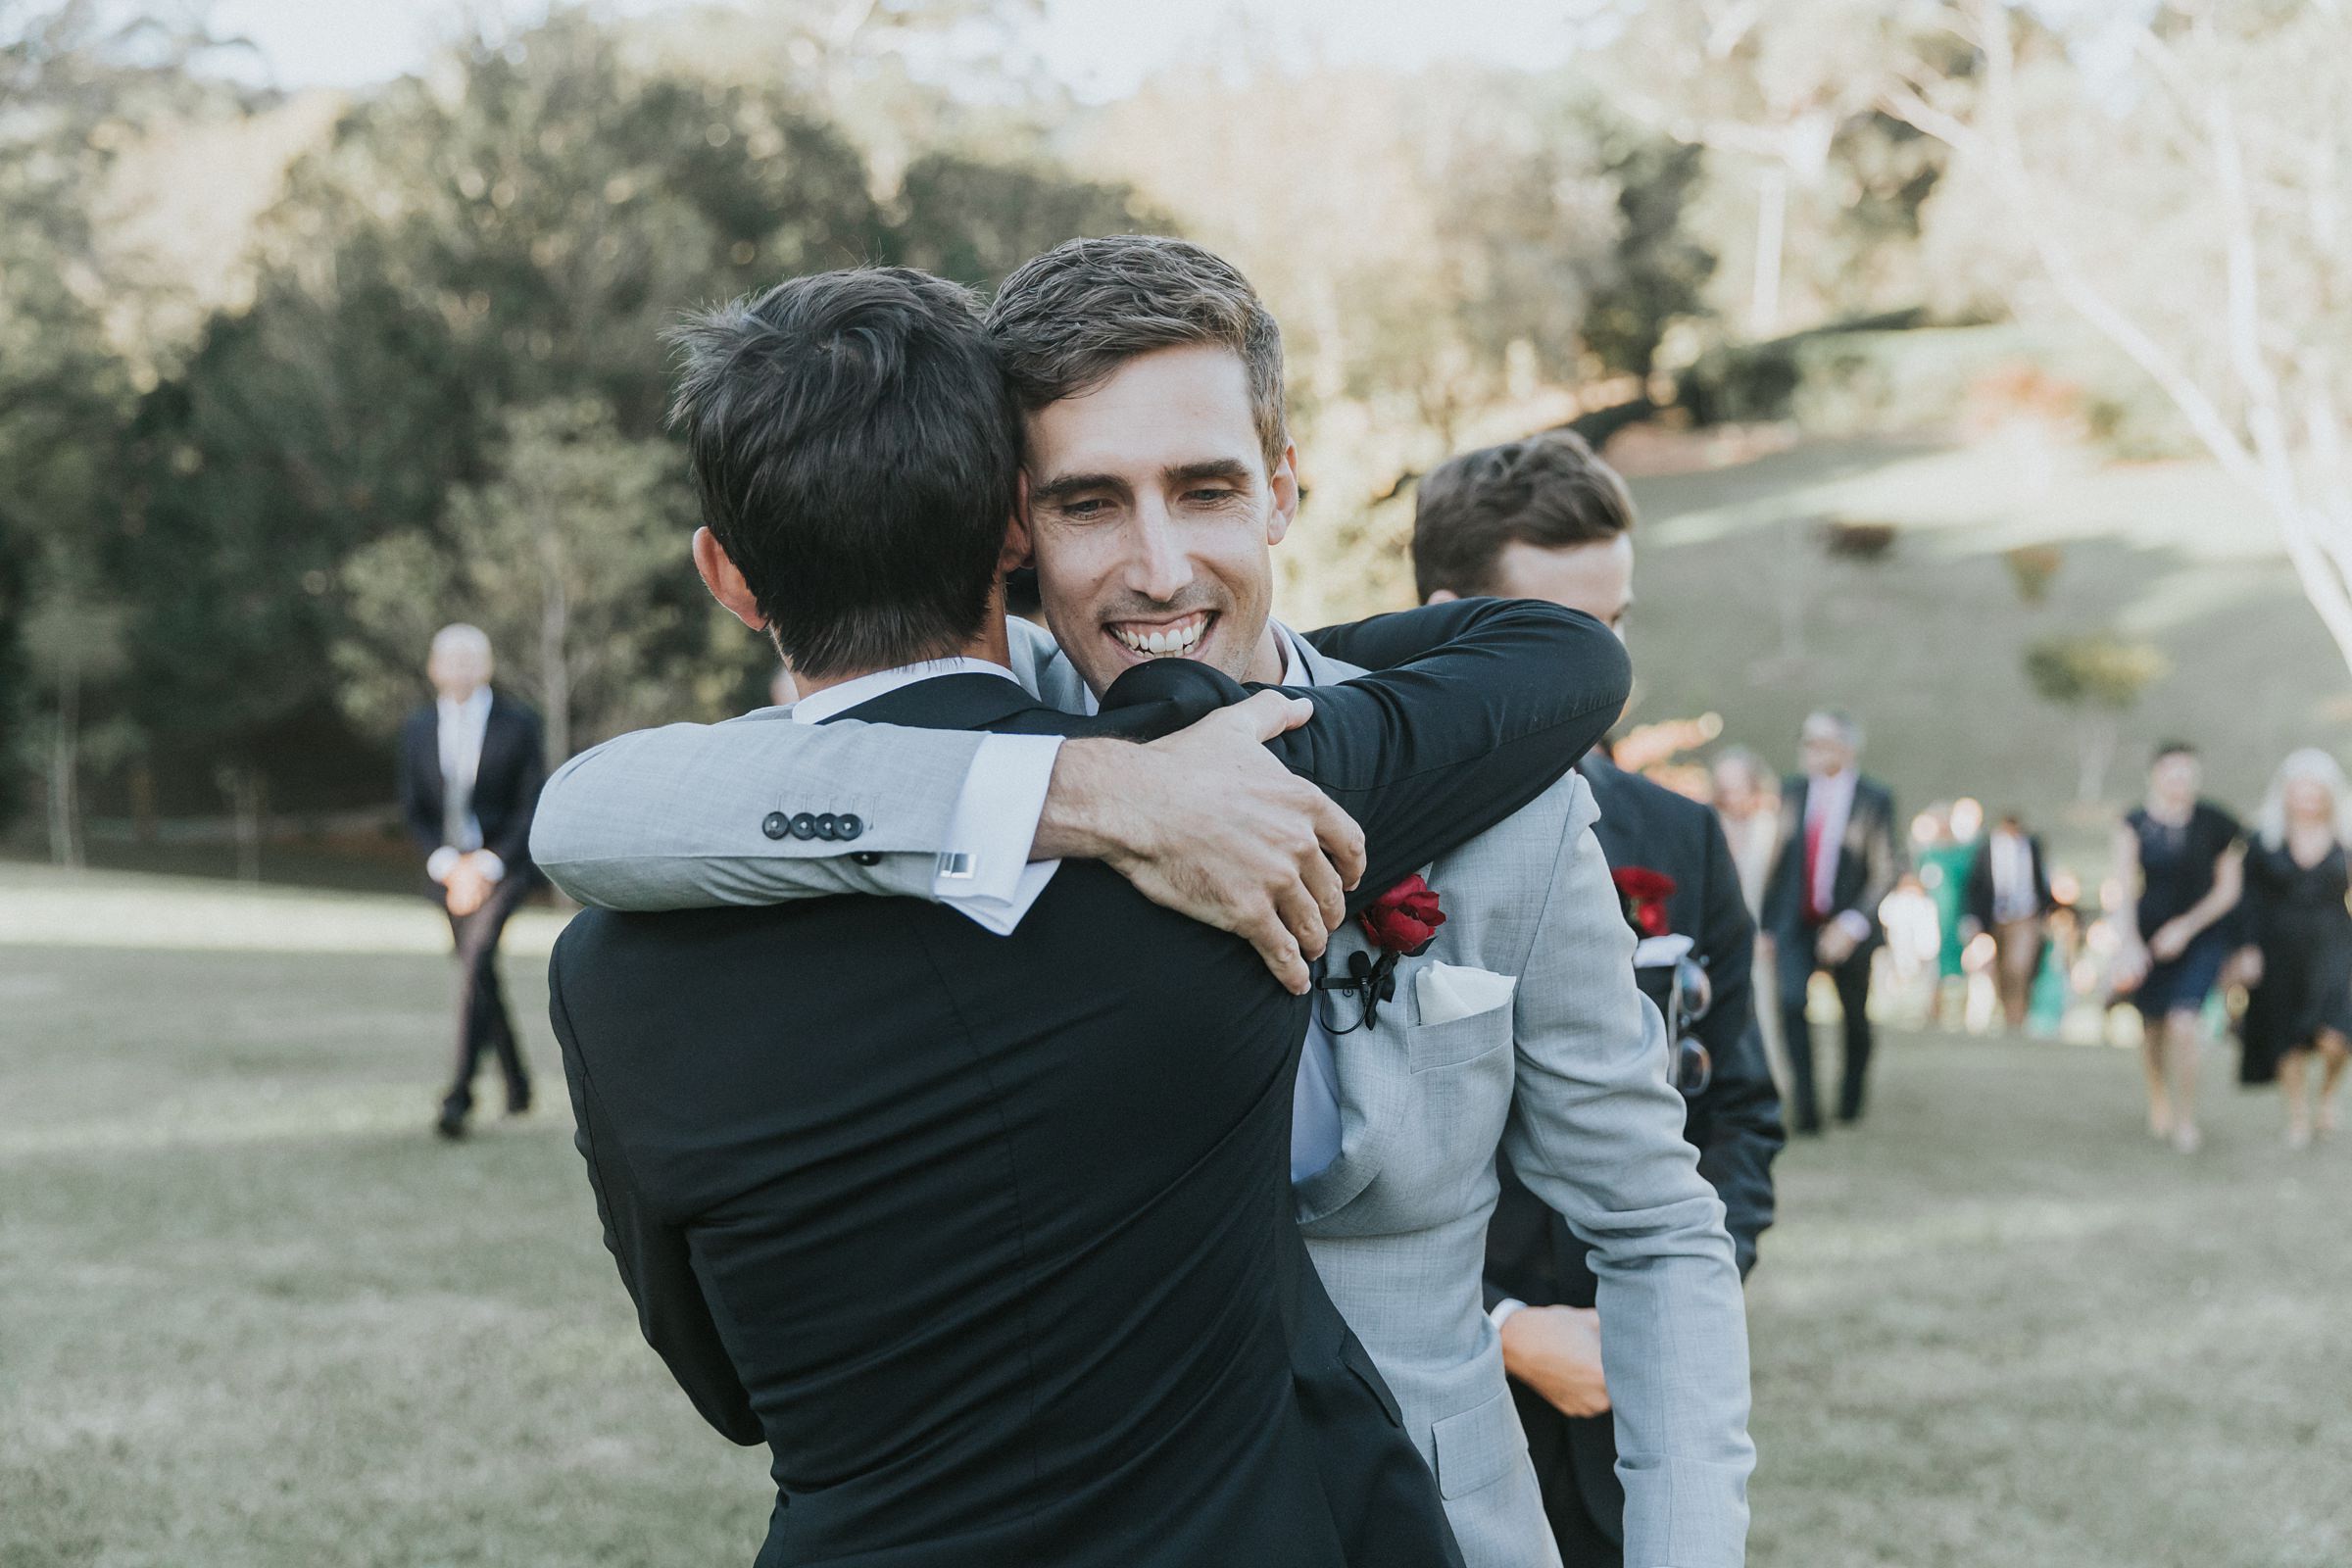 groom being congratulated by brother after wedding ceremony